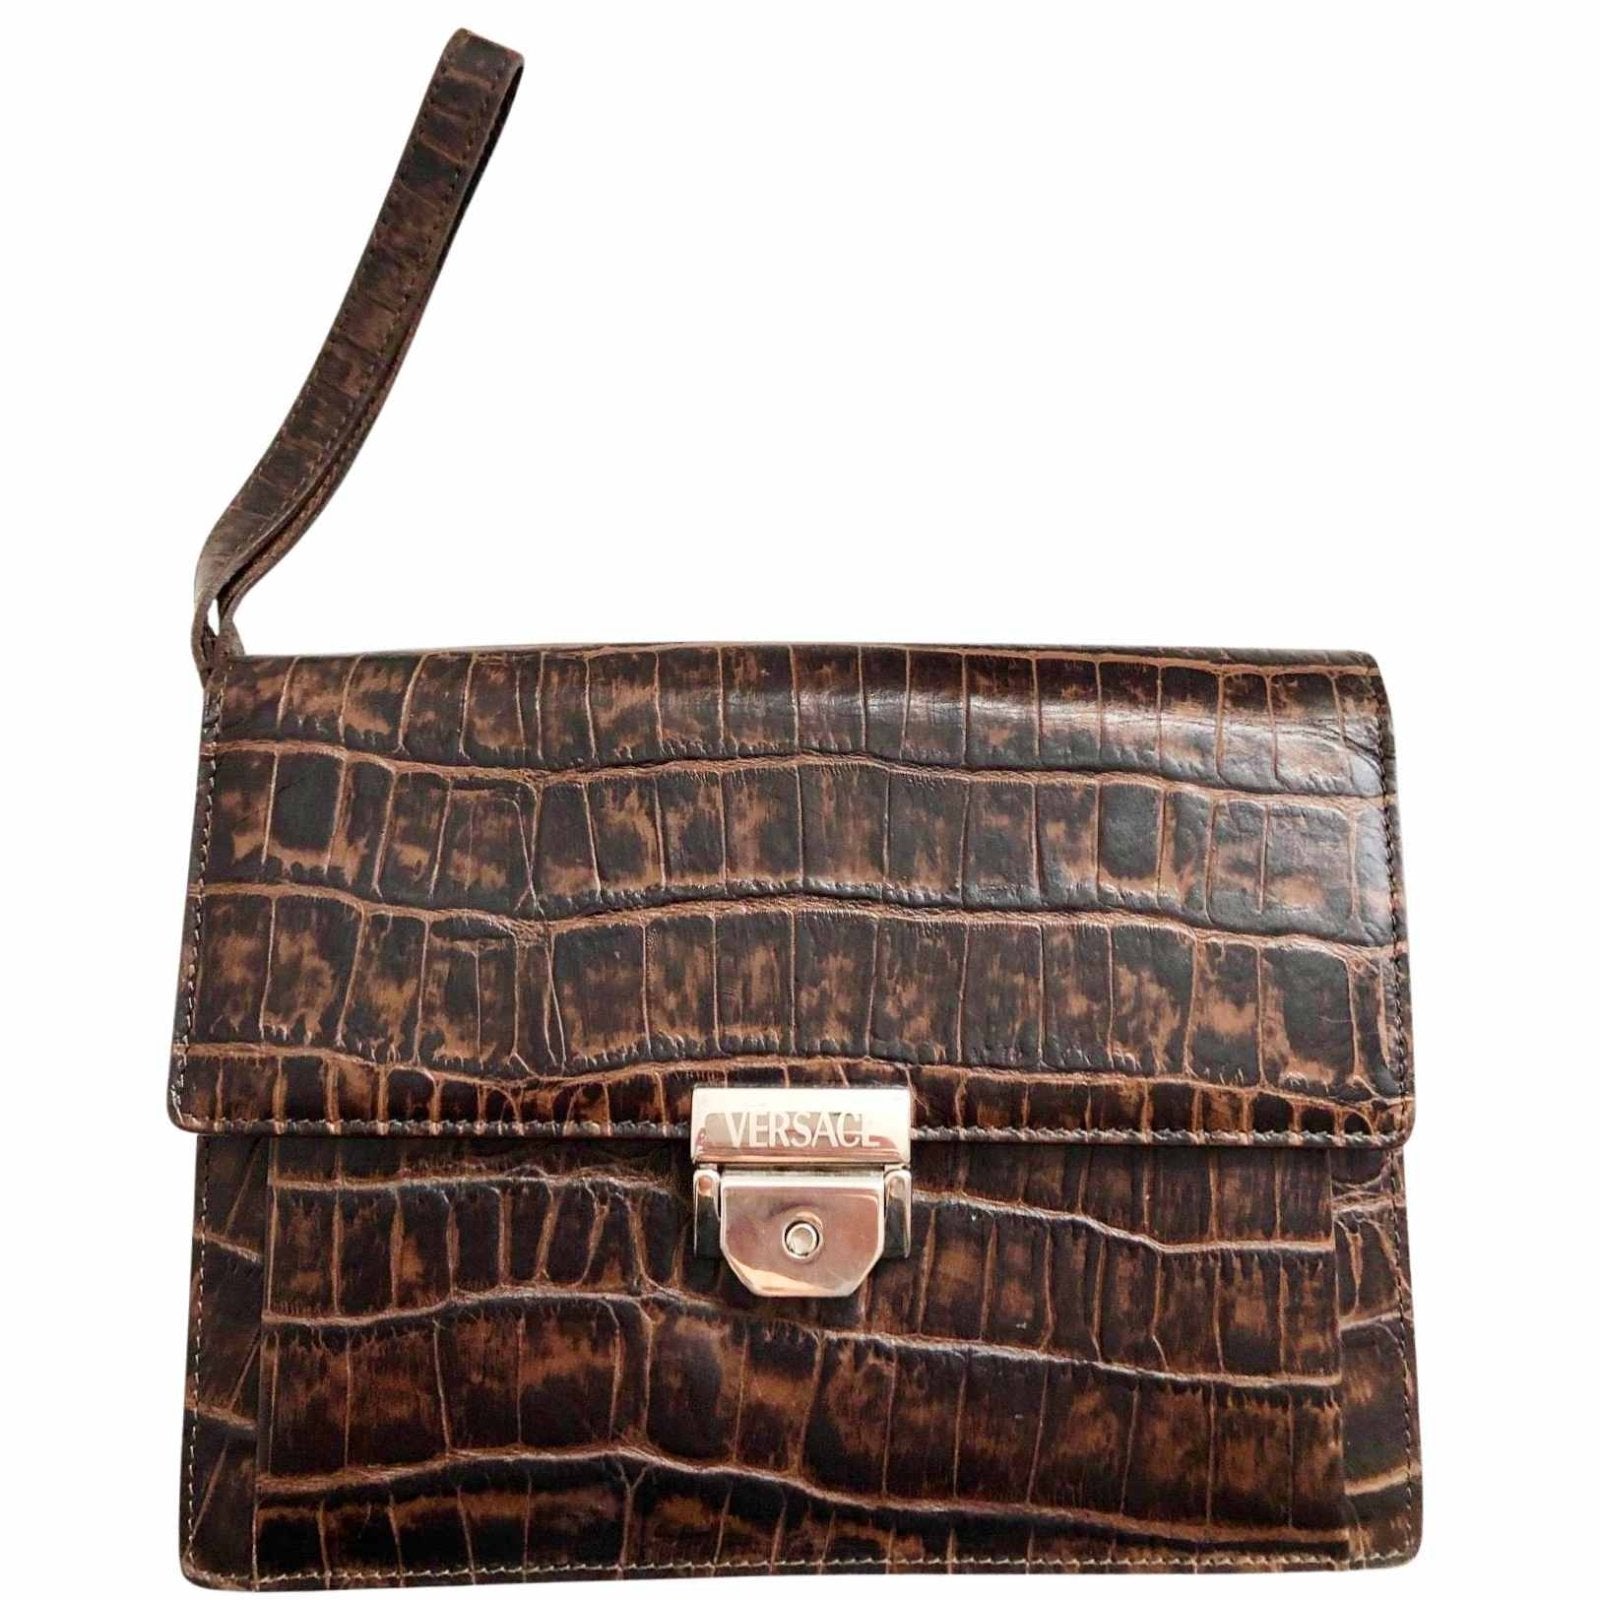 1980s GIANNI VERSACE CROC Brown Leather Envelope Bag - style - CHNGR